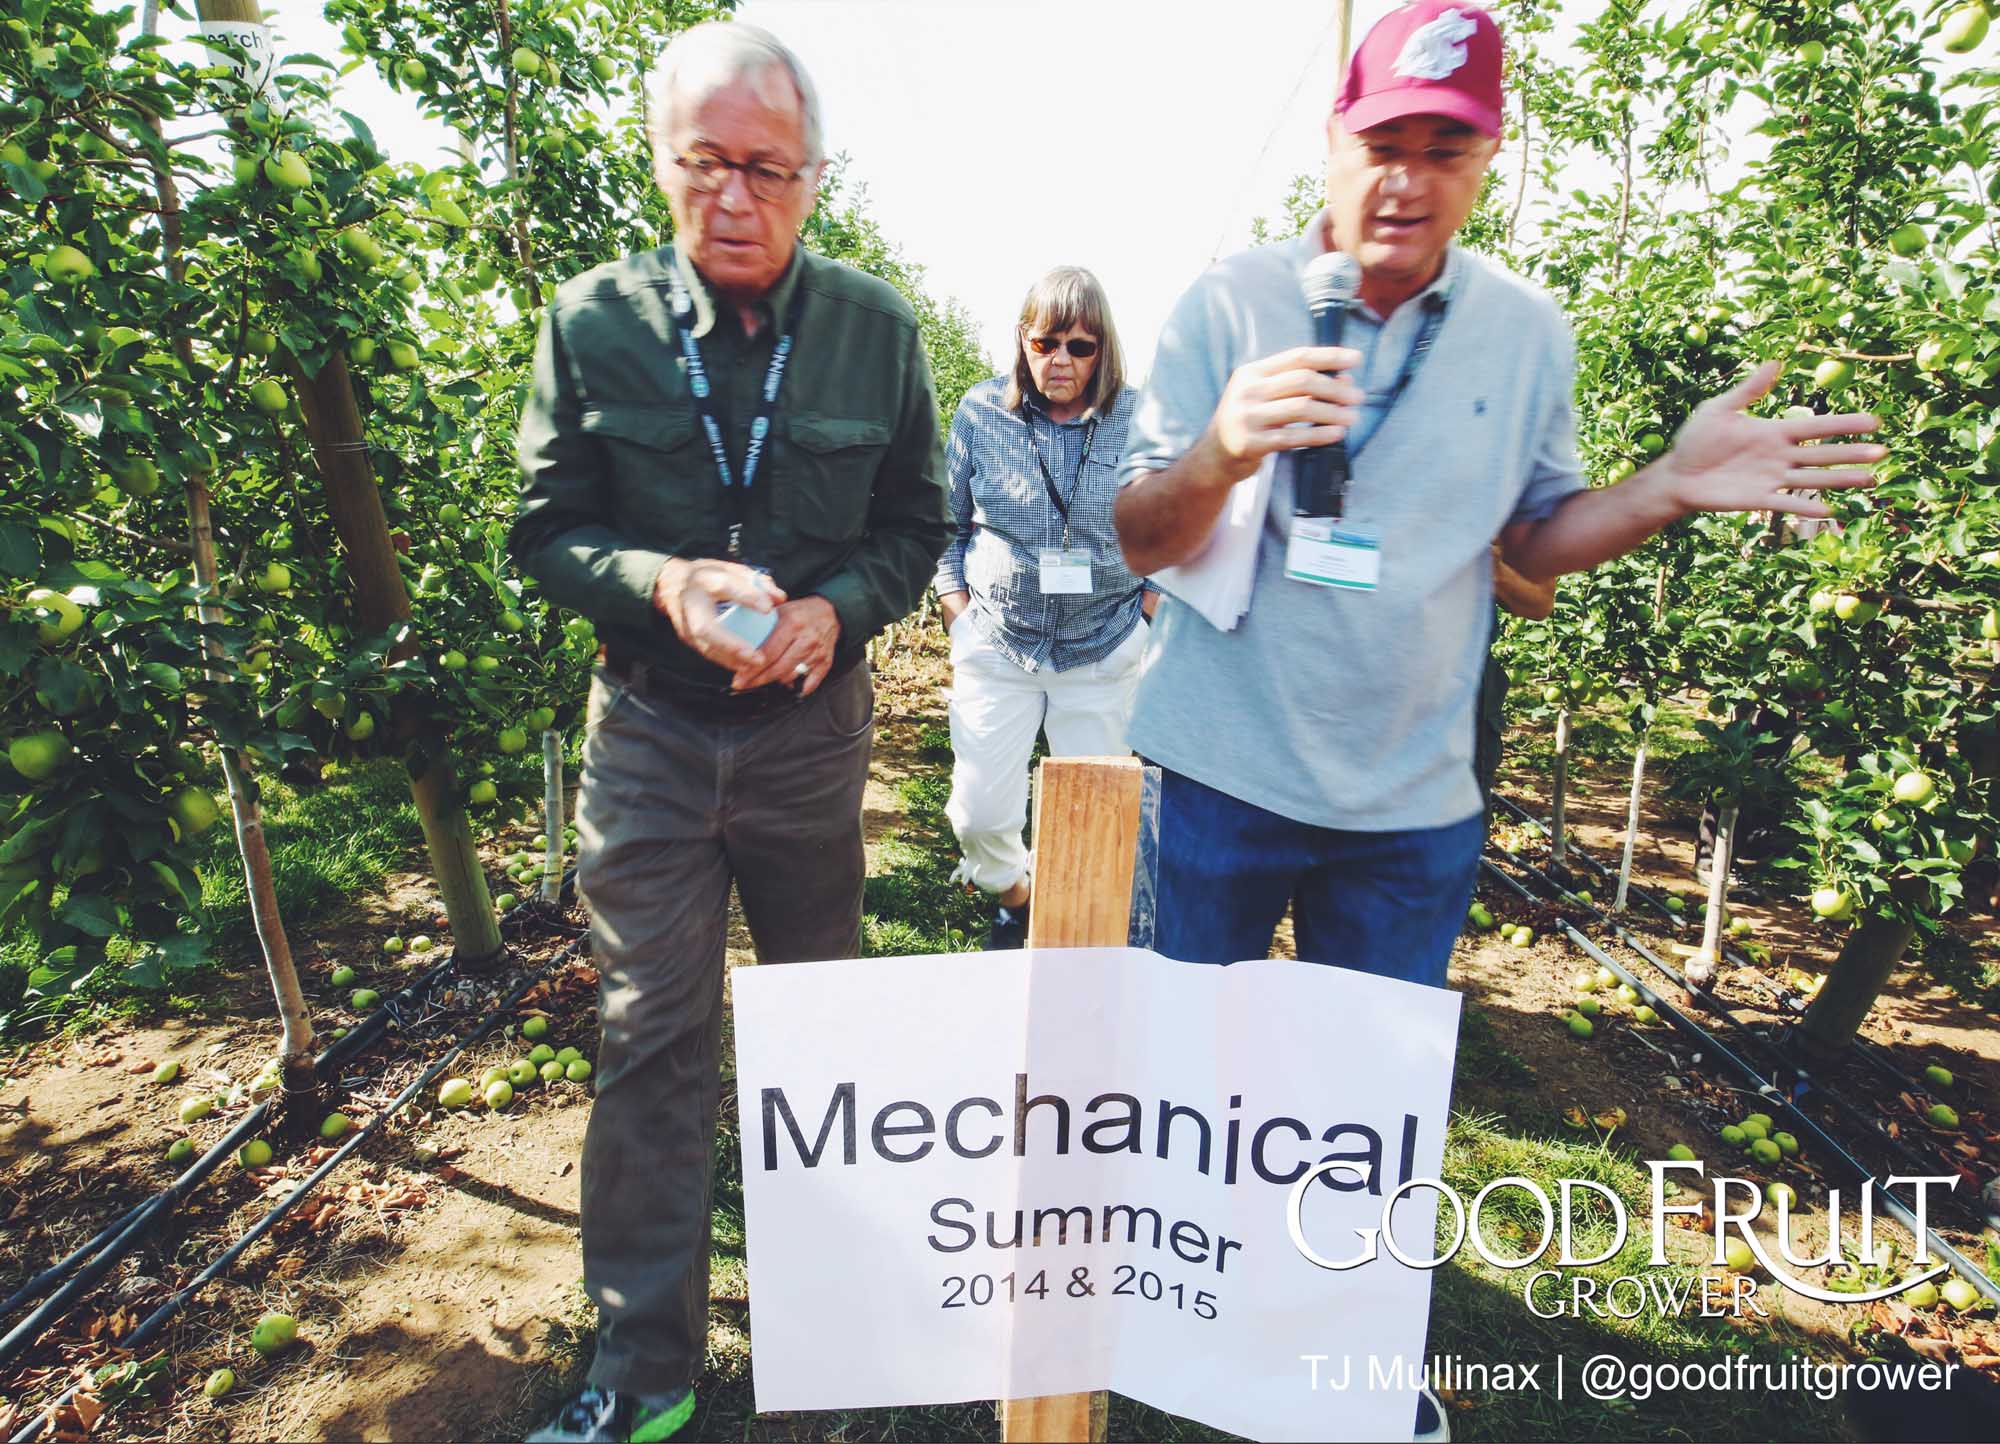 Stefano Musacchi - If you summer prune without shade cloth you are done. Sunburn will critically damage the crop. <b> (TJ Mullinax/Good Fruit Grower)</b>